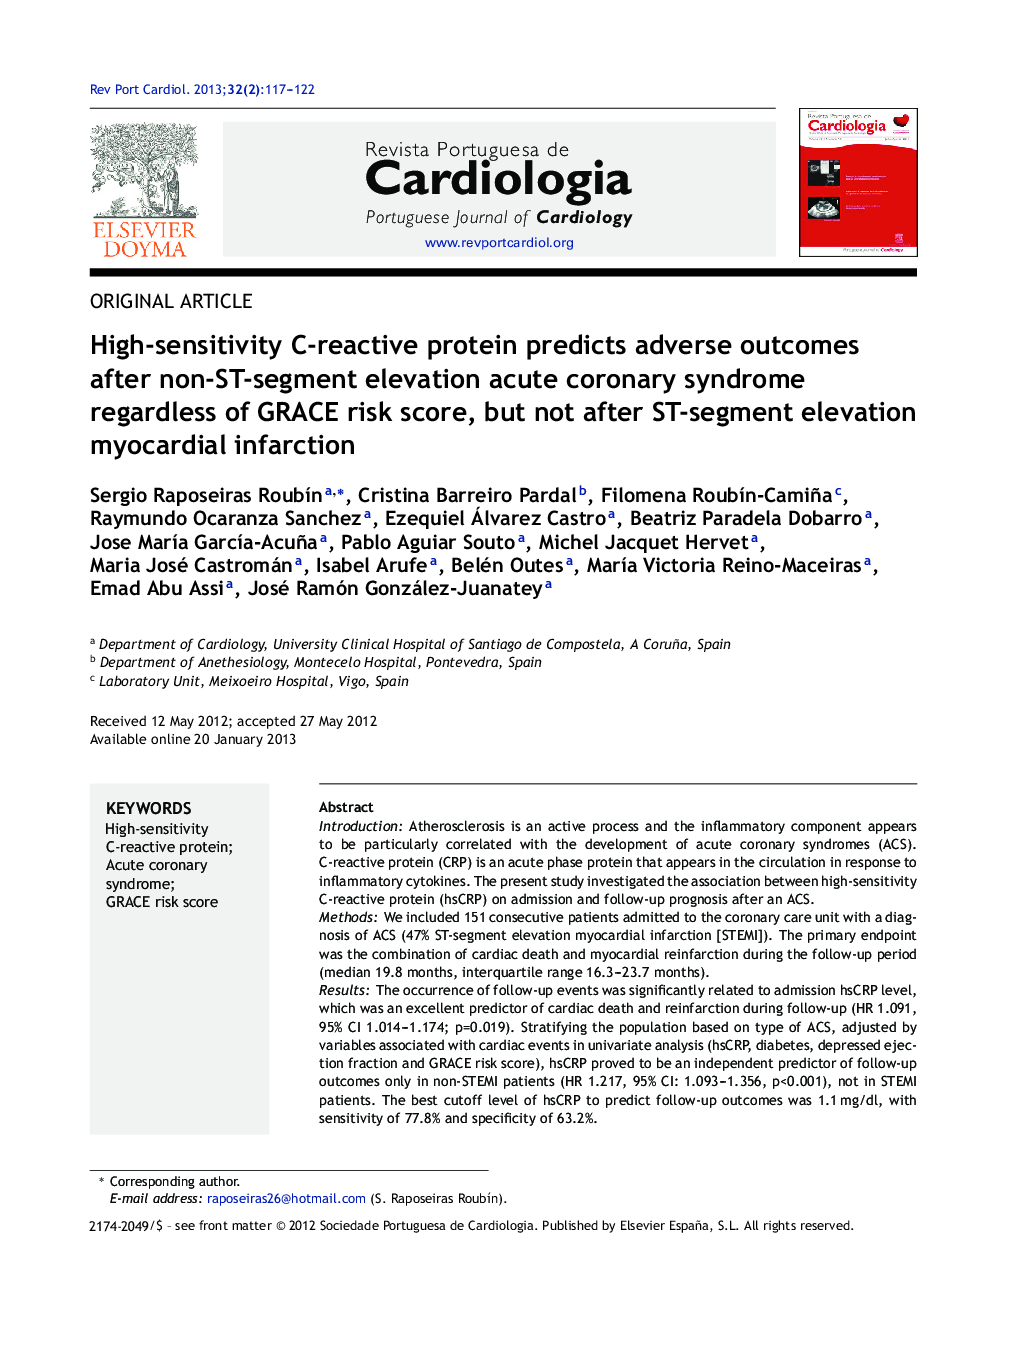 High-sensitivity C-reactive protein predicts adverse outcomes after non-ST-segment elevation acute coronary syndrome regardless of GRACE risk score, but not after ST-segment elevation myocardial infarction